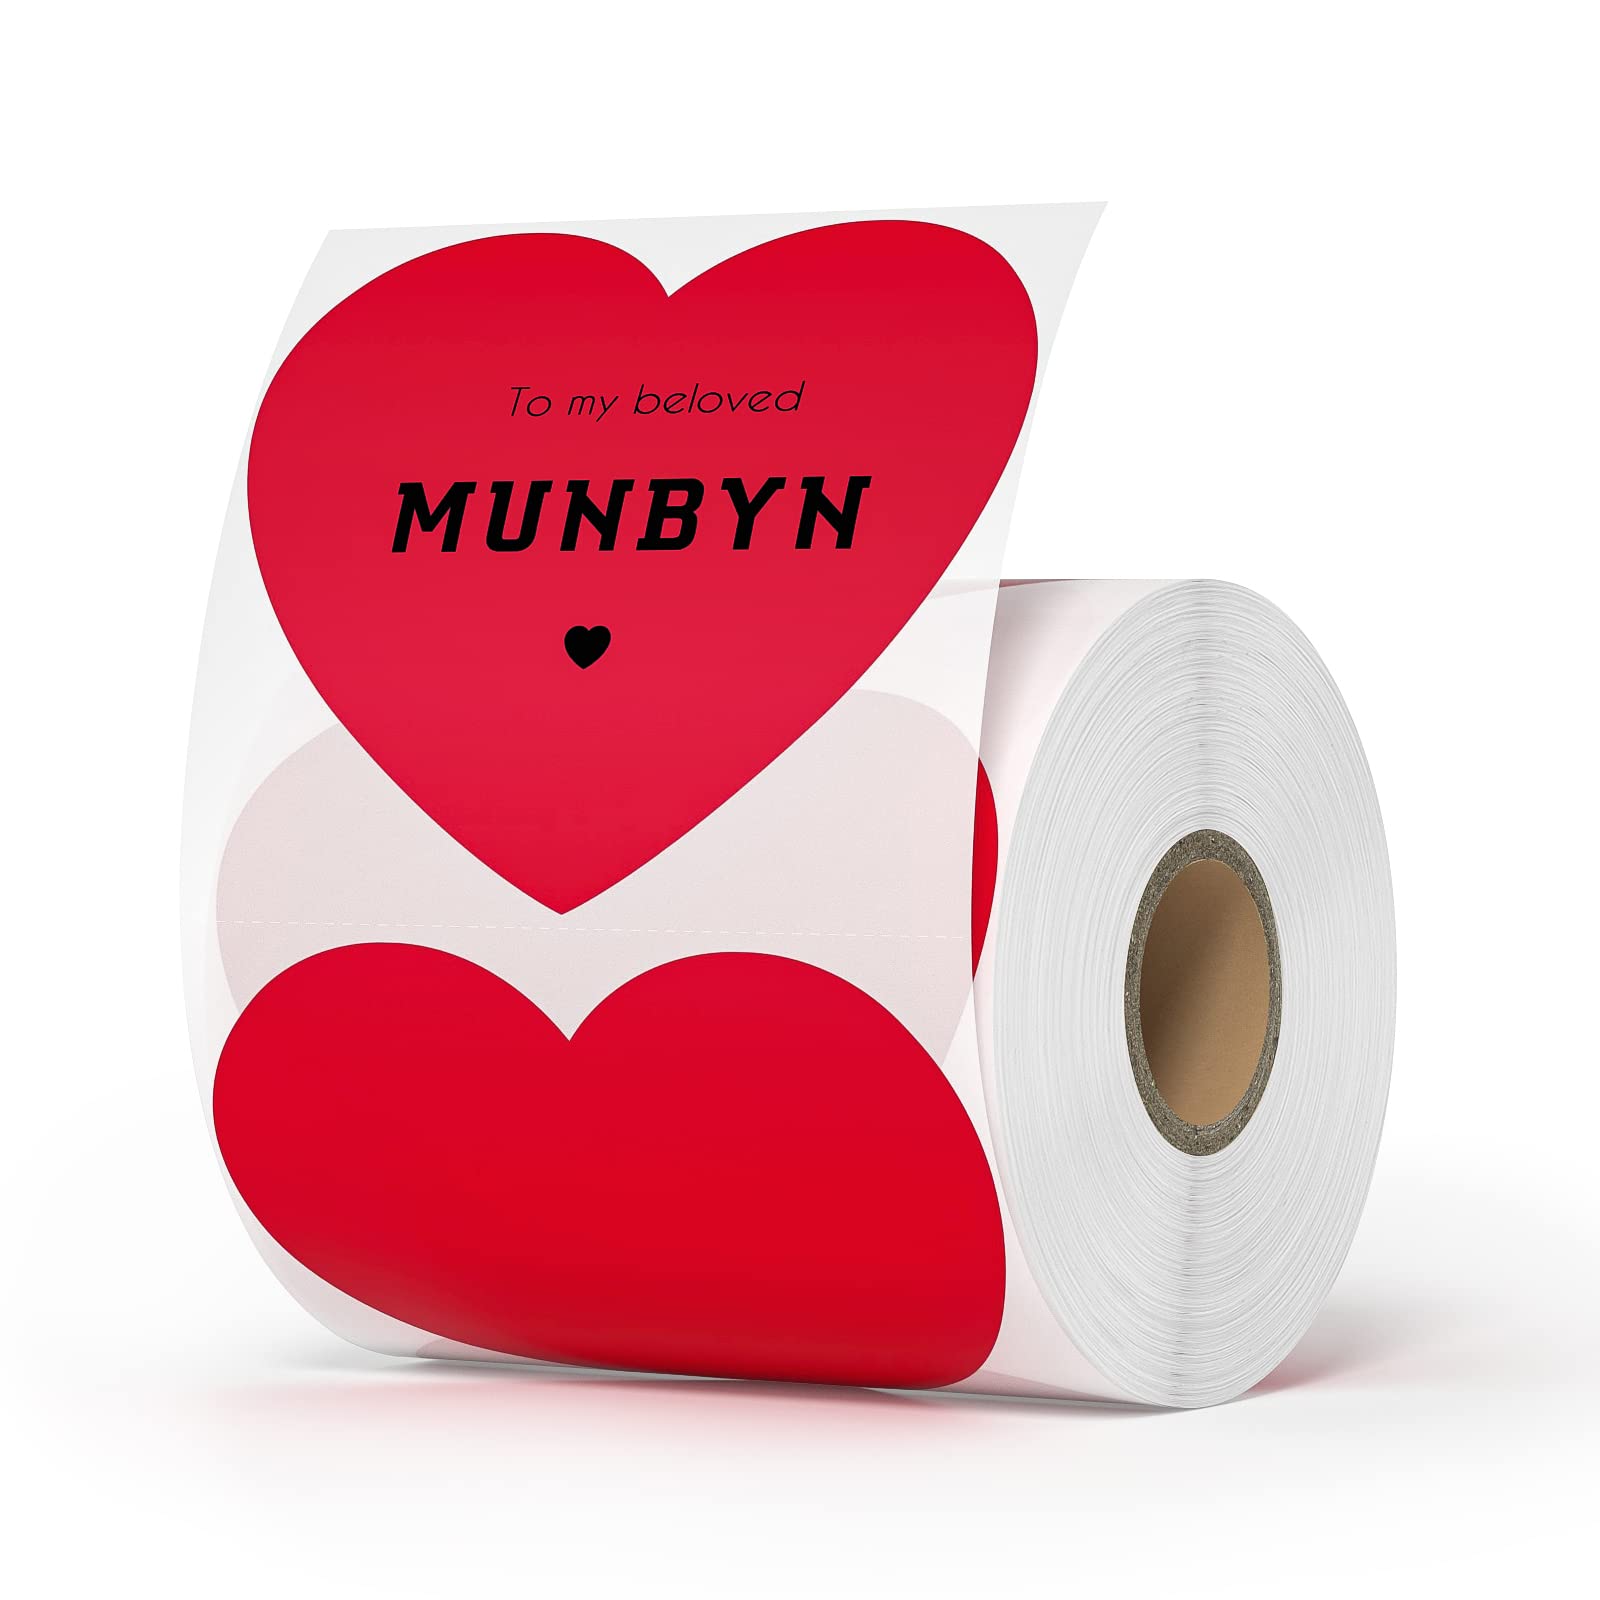 MUNBYN 3" Heart Thermal Stickers, Heart-Shaped Adhesive Sticker Labels, Red Love Thermal Labels for Gift, Wedding, Anniversary, Valentine's Day, Small Business 400 Labels/Roll